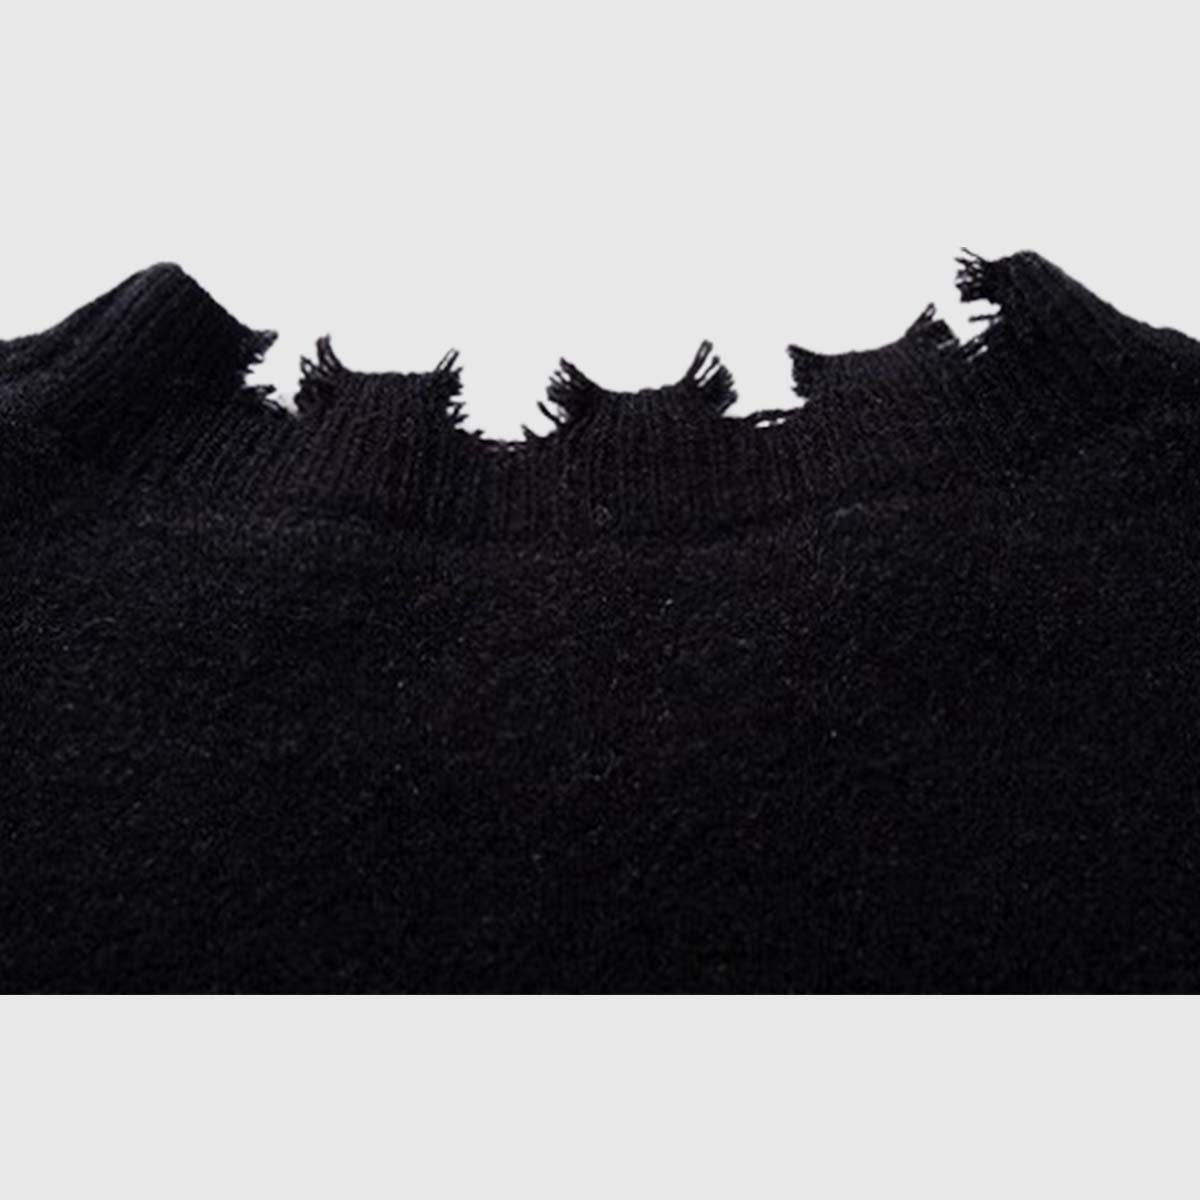 Distressed Gothic Dog Sweater